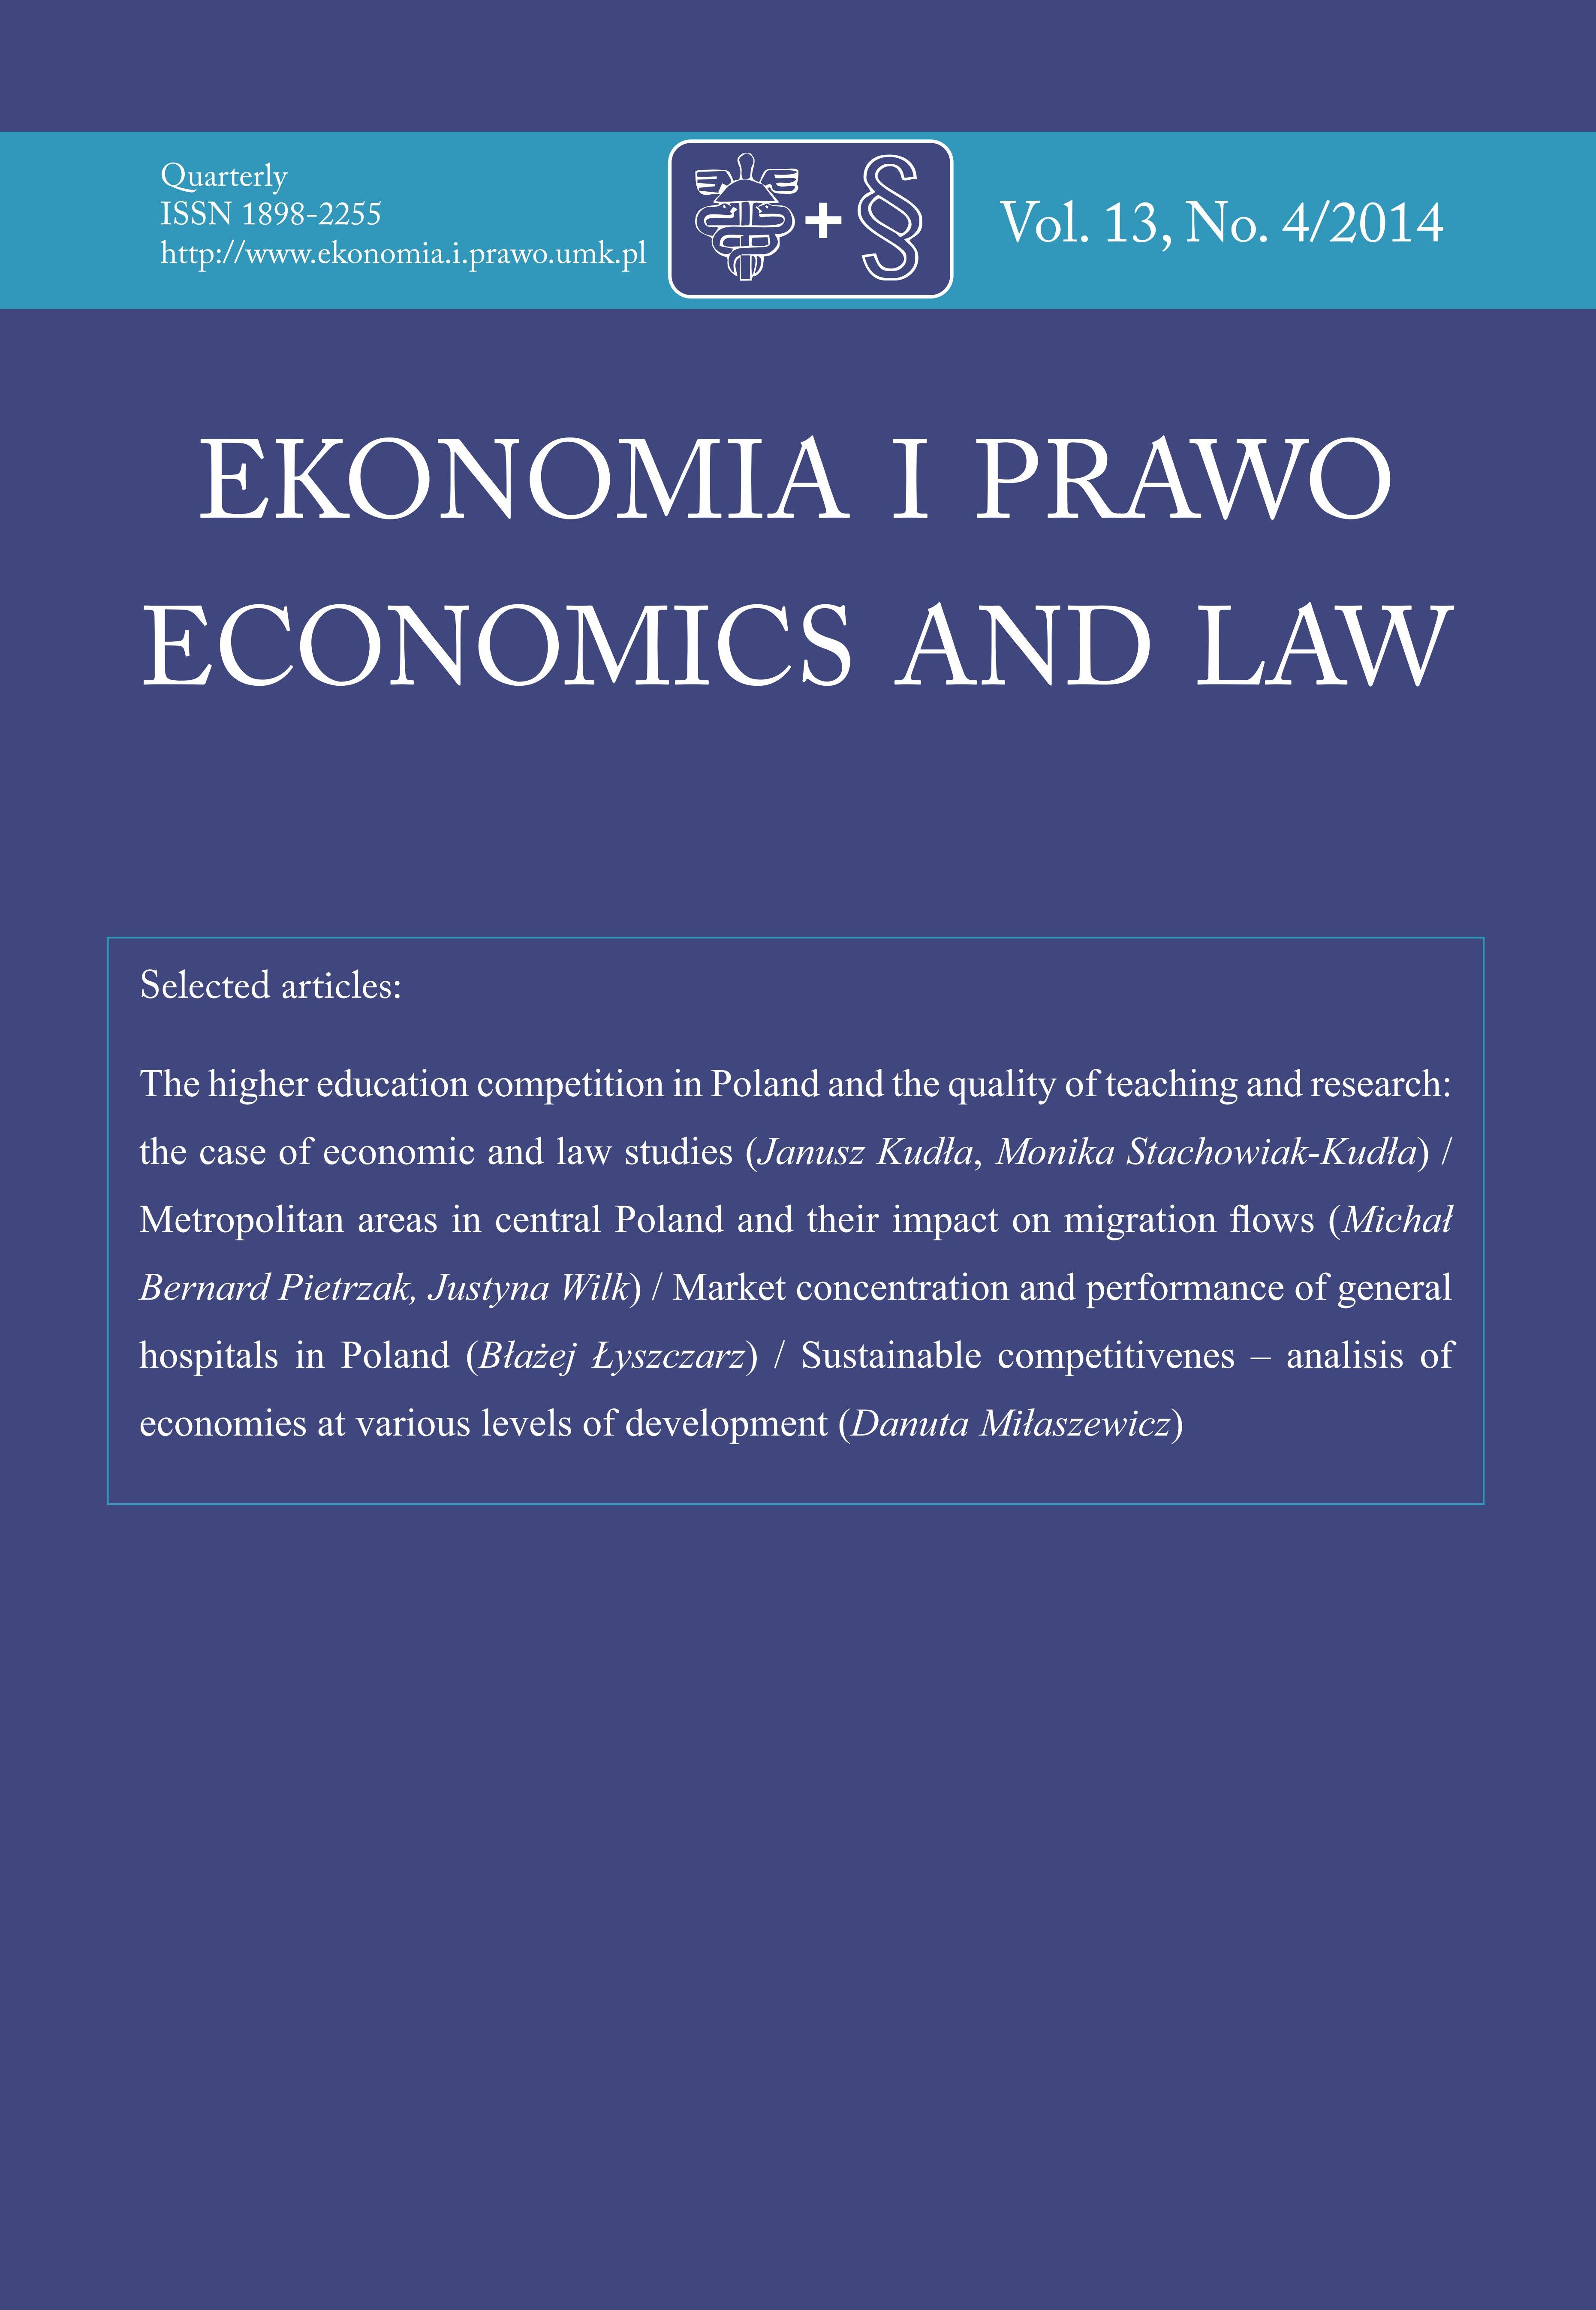 THE HIGHER EDUCATION COMPETITION IN POLAND AND THE QUALITY OF TEACHING AND RESEARCH: THE CASE OF ECONOMIC AND LAW STUDIES Cover Image